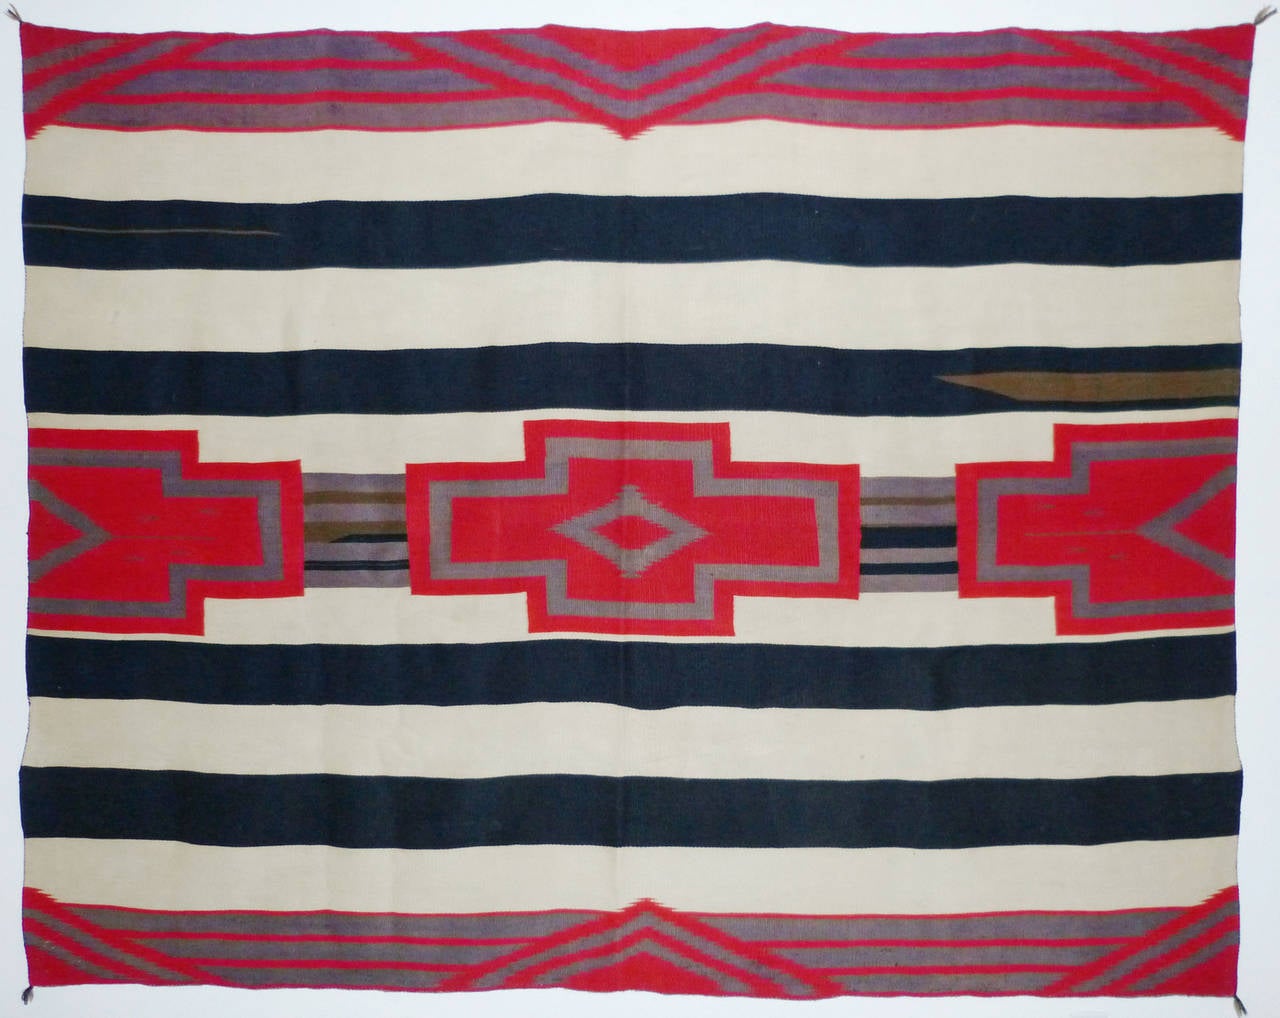 A third phase variant chief’s blanket, circa 1890's. Woven from commercially spun and dyed wool with a banded background and cross motifs. Chief blanket is a misnomer, as the Navajo tribe has a clan system, there were no chiefs. However, prominent